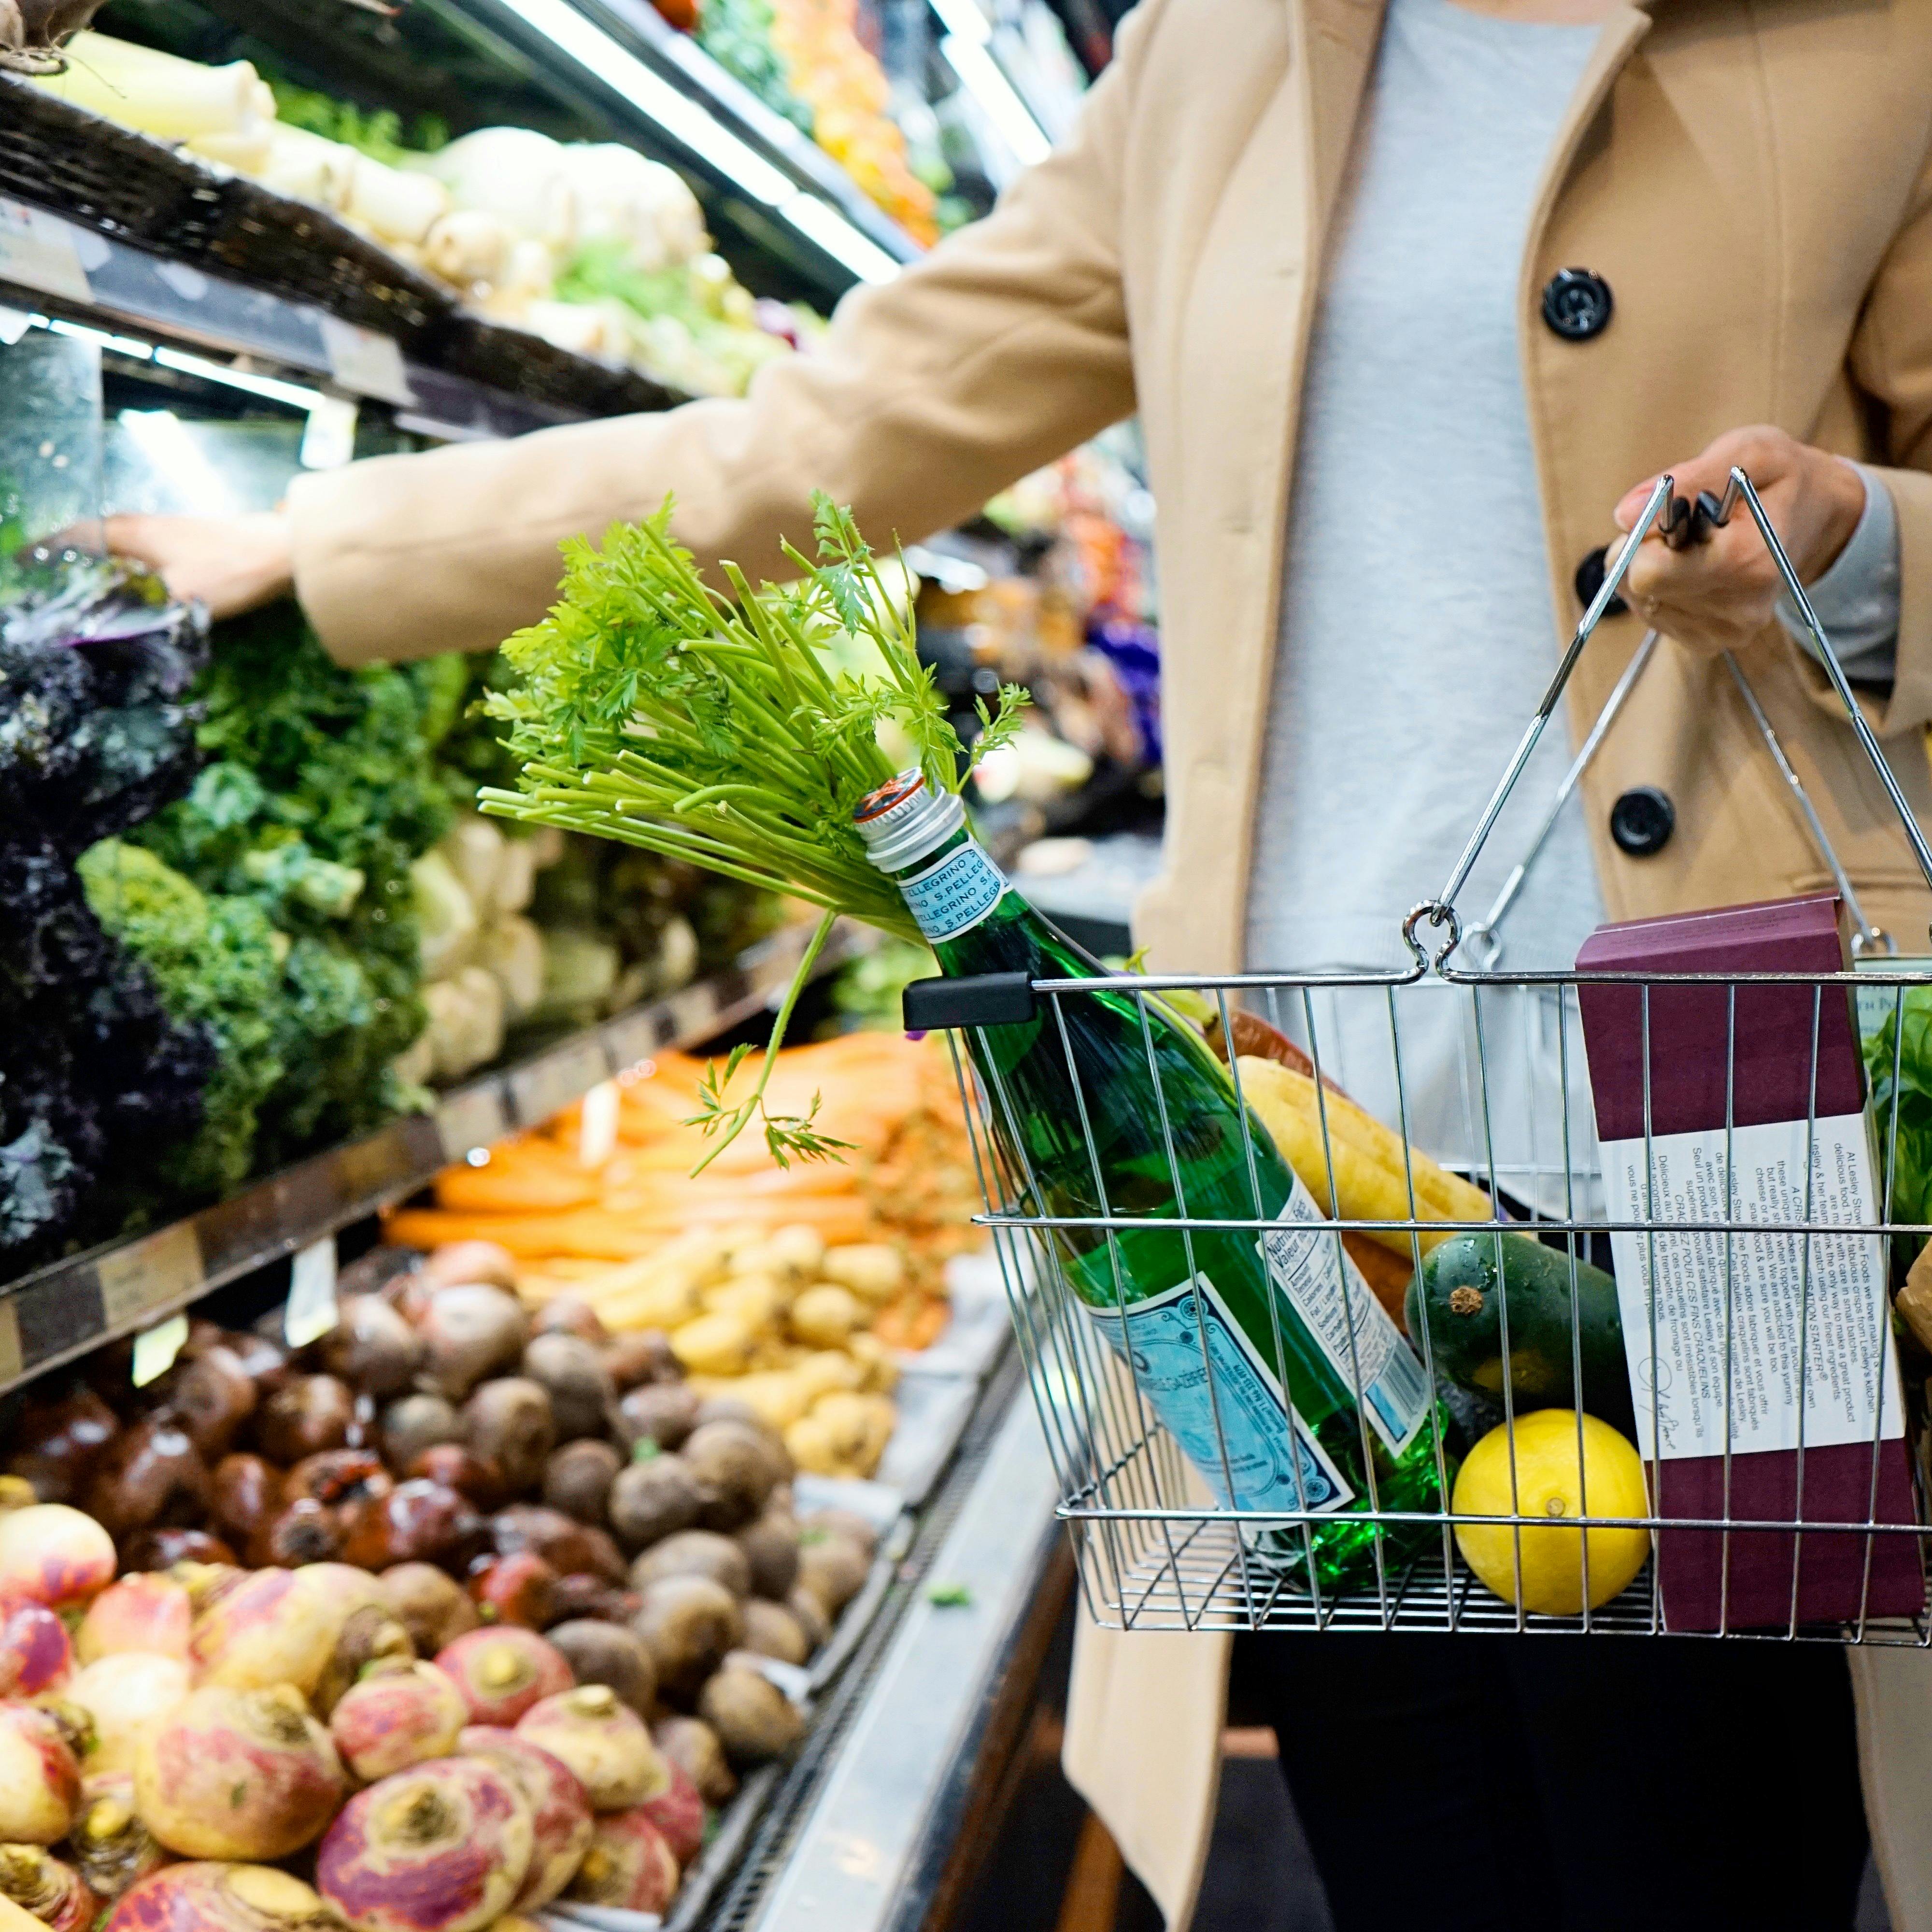 A woman shopping for groceries | Source: Pexels